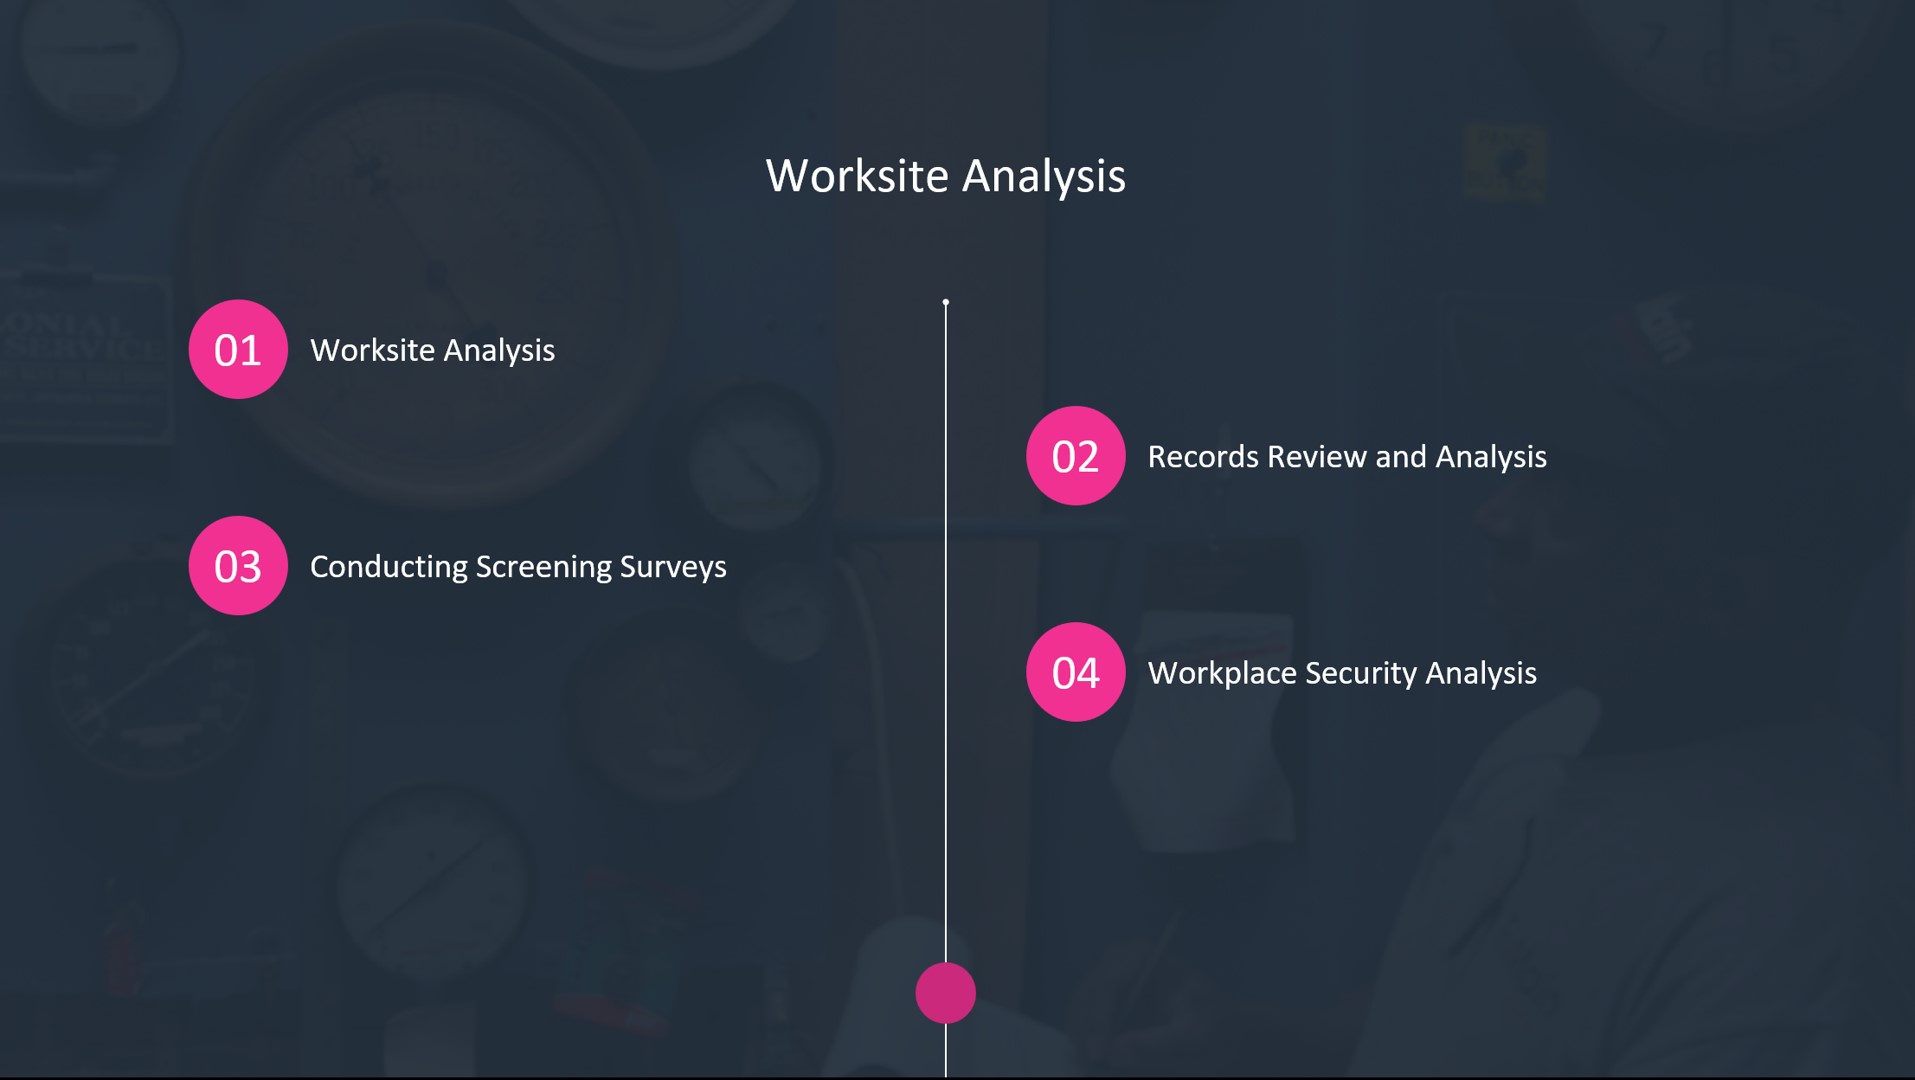 Image entitled worksite analysis in white. Pink bubbles mark a list with: 1) worksite analysis, 2) records review and analysis, 3) conducting screening surveys, 4) workplace security analysis